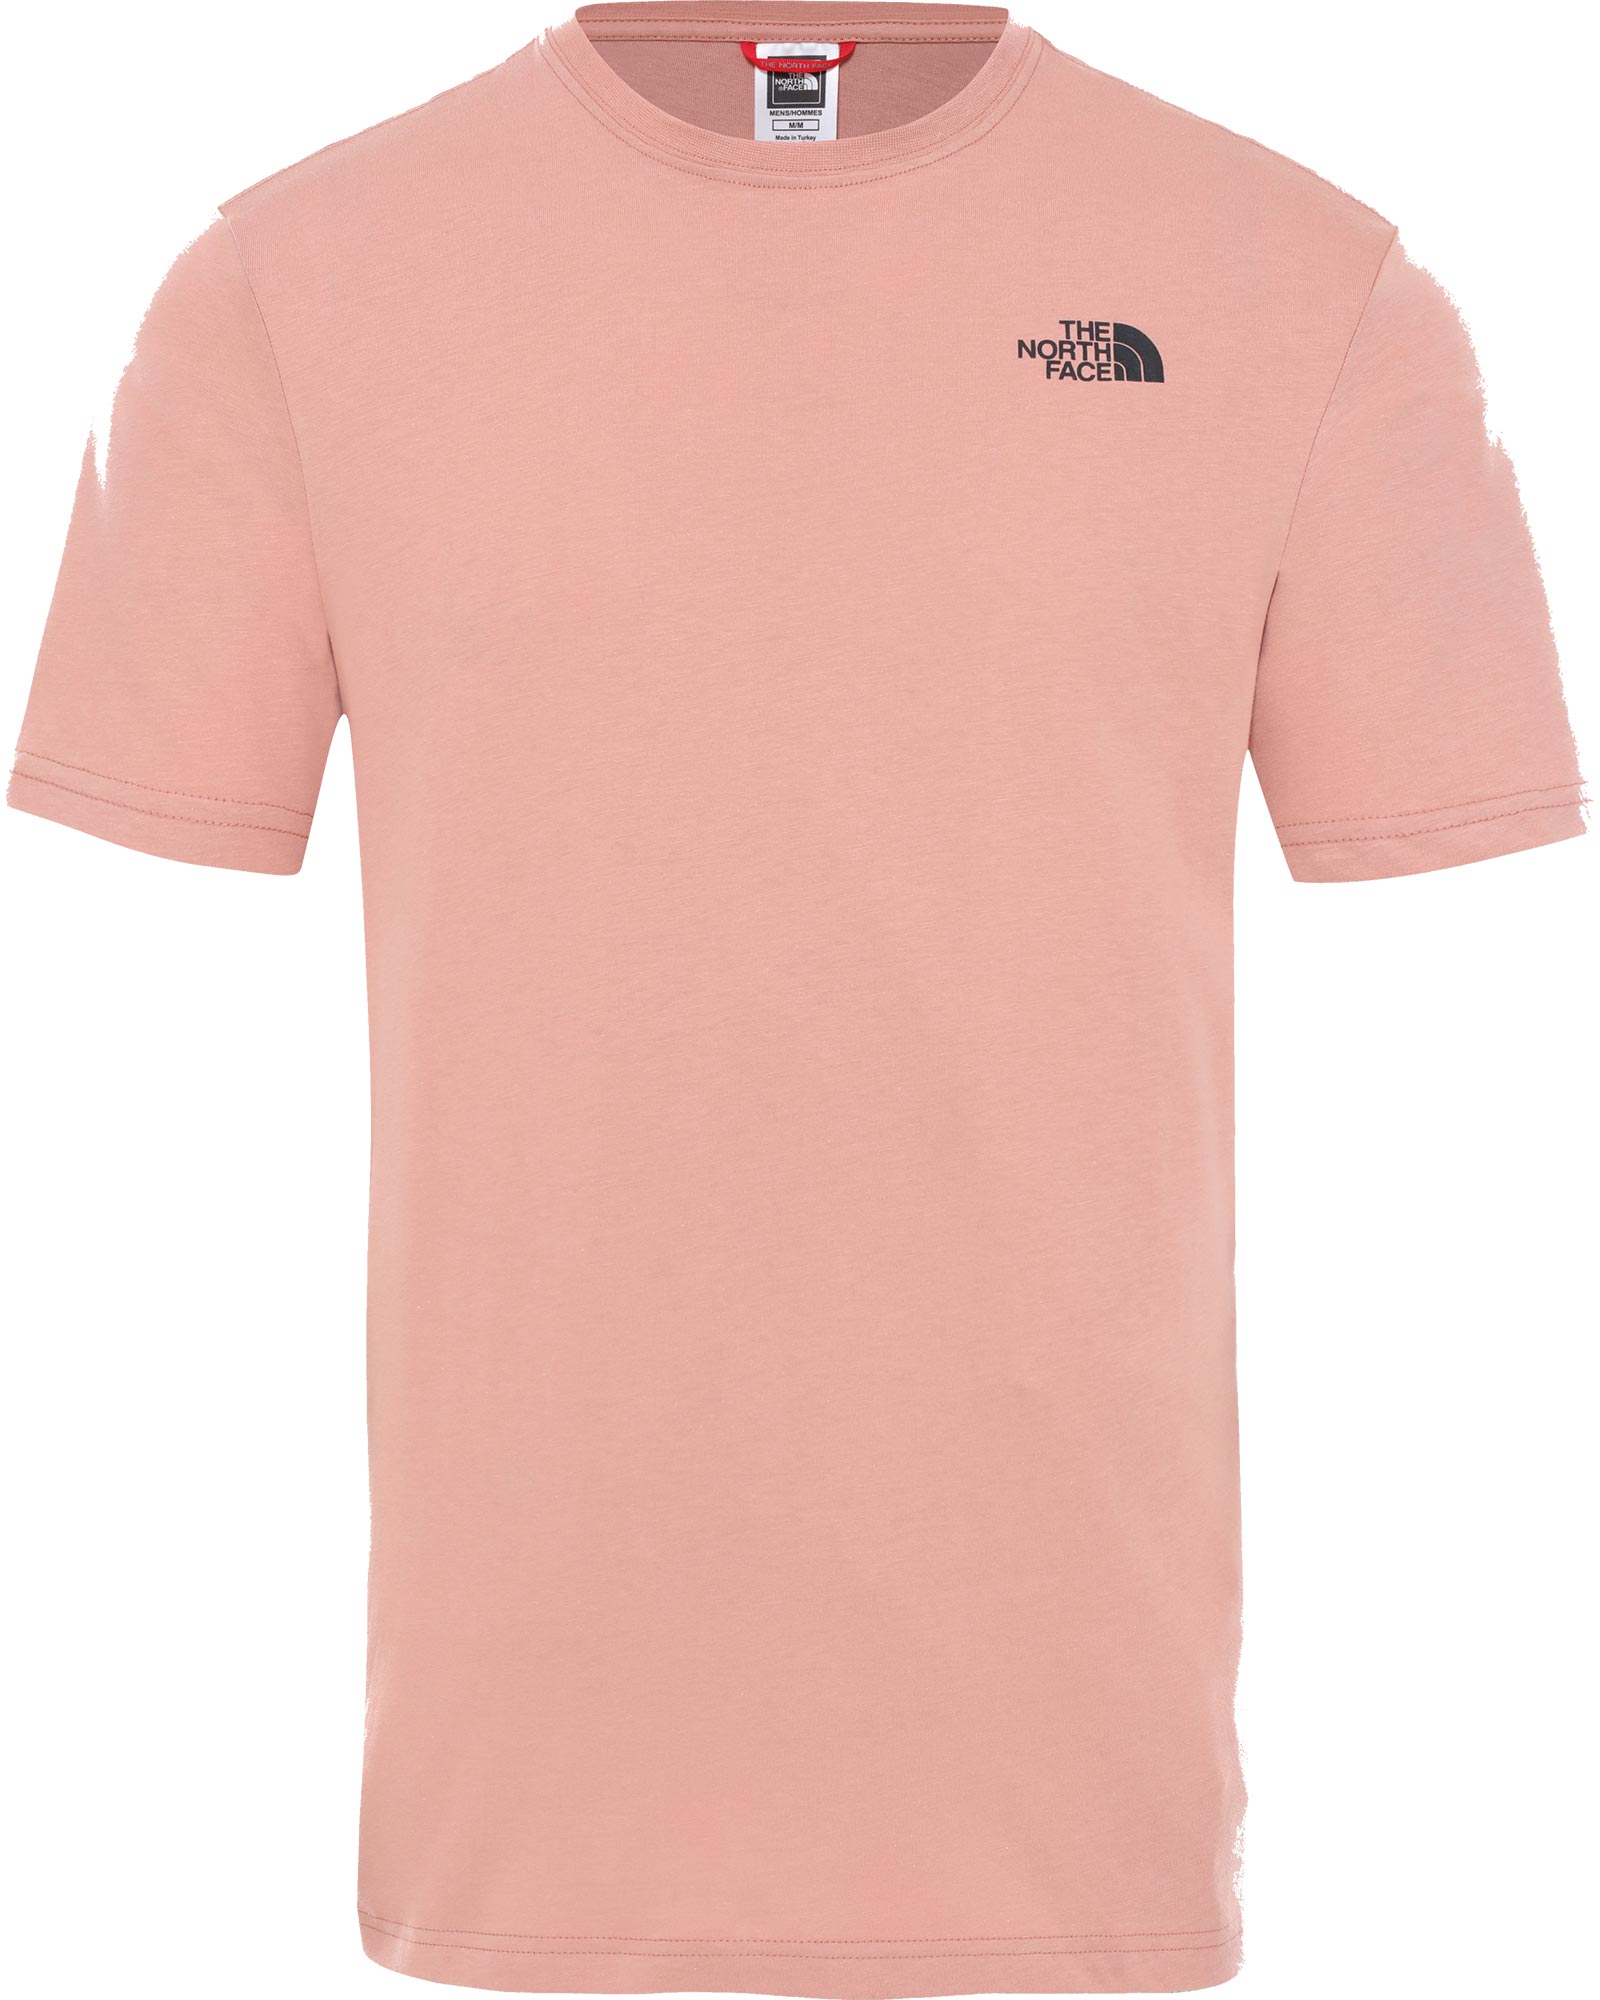 The North Face Red Box Men’s T Shirt - Pink Clay S